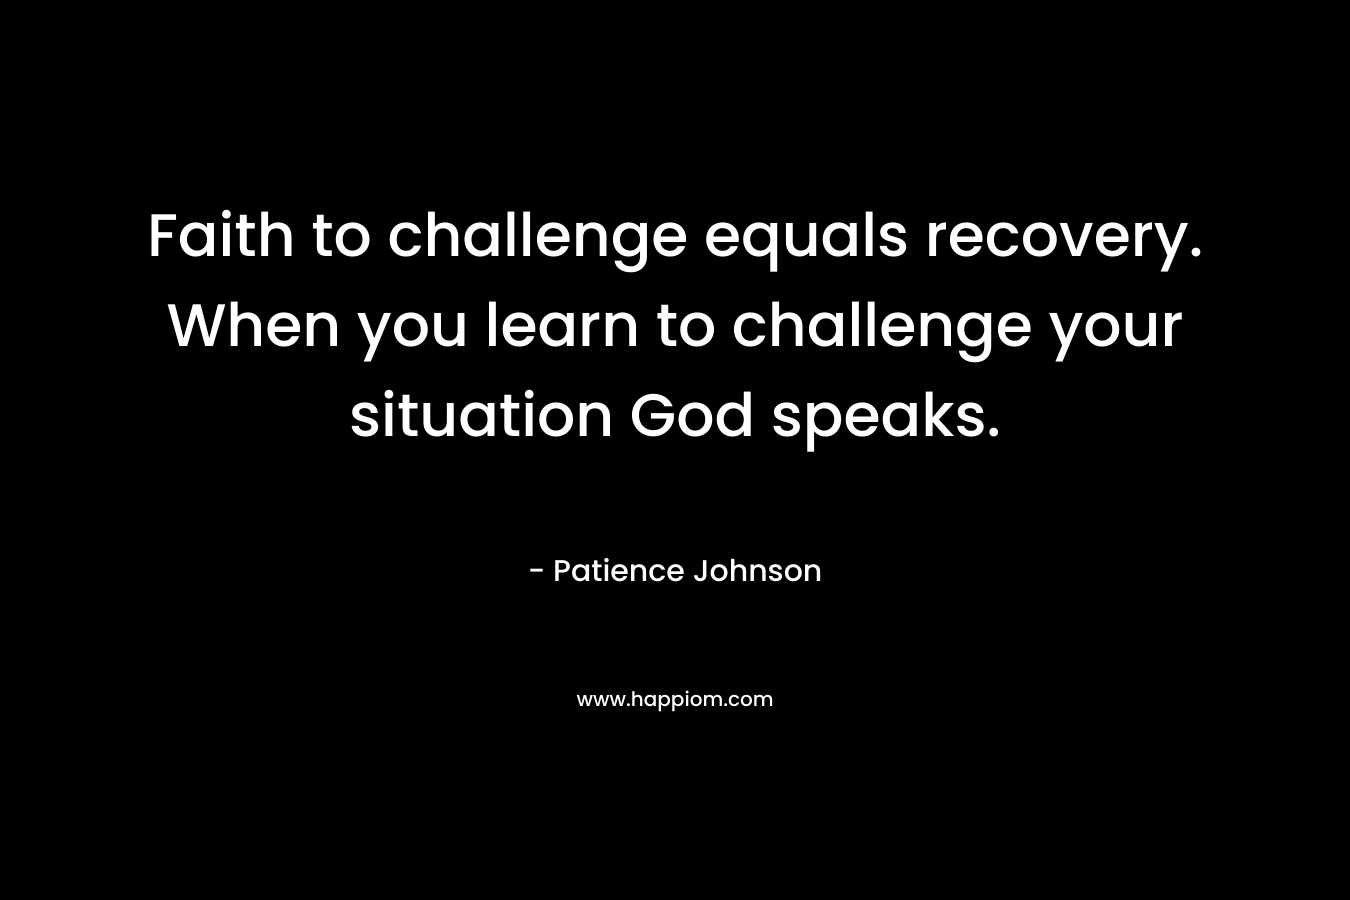 Faith to challenge equals recovery. When you learn to challenge your situation God speaks.